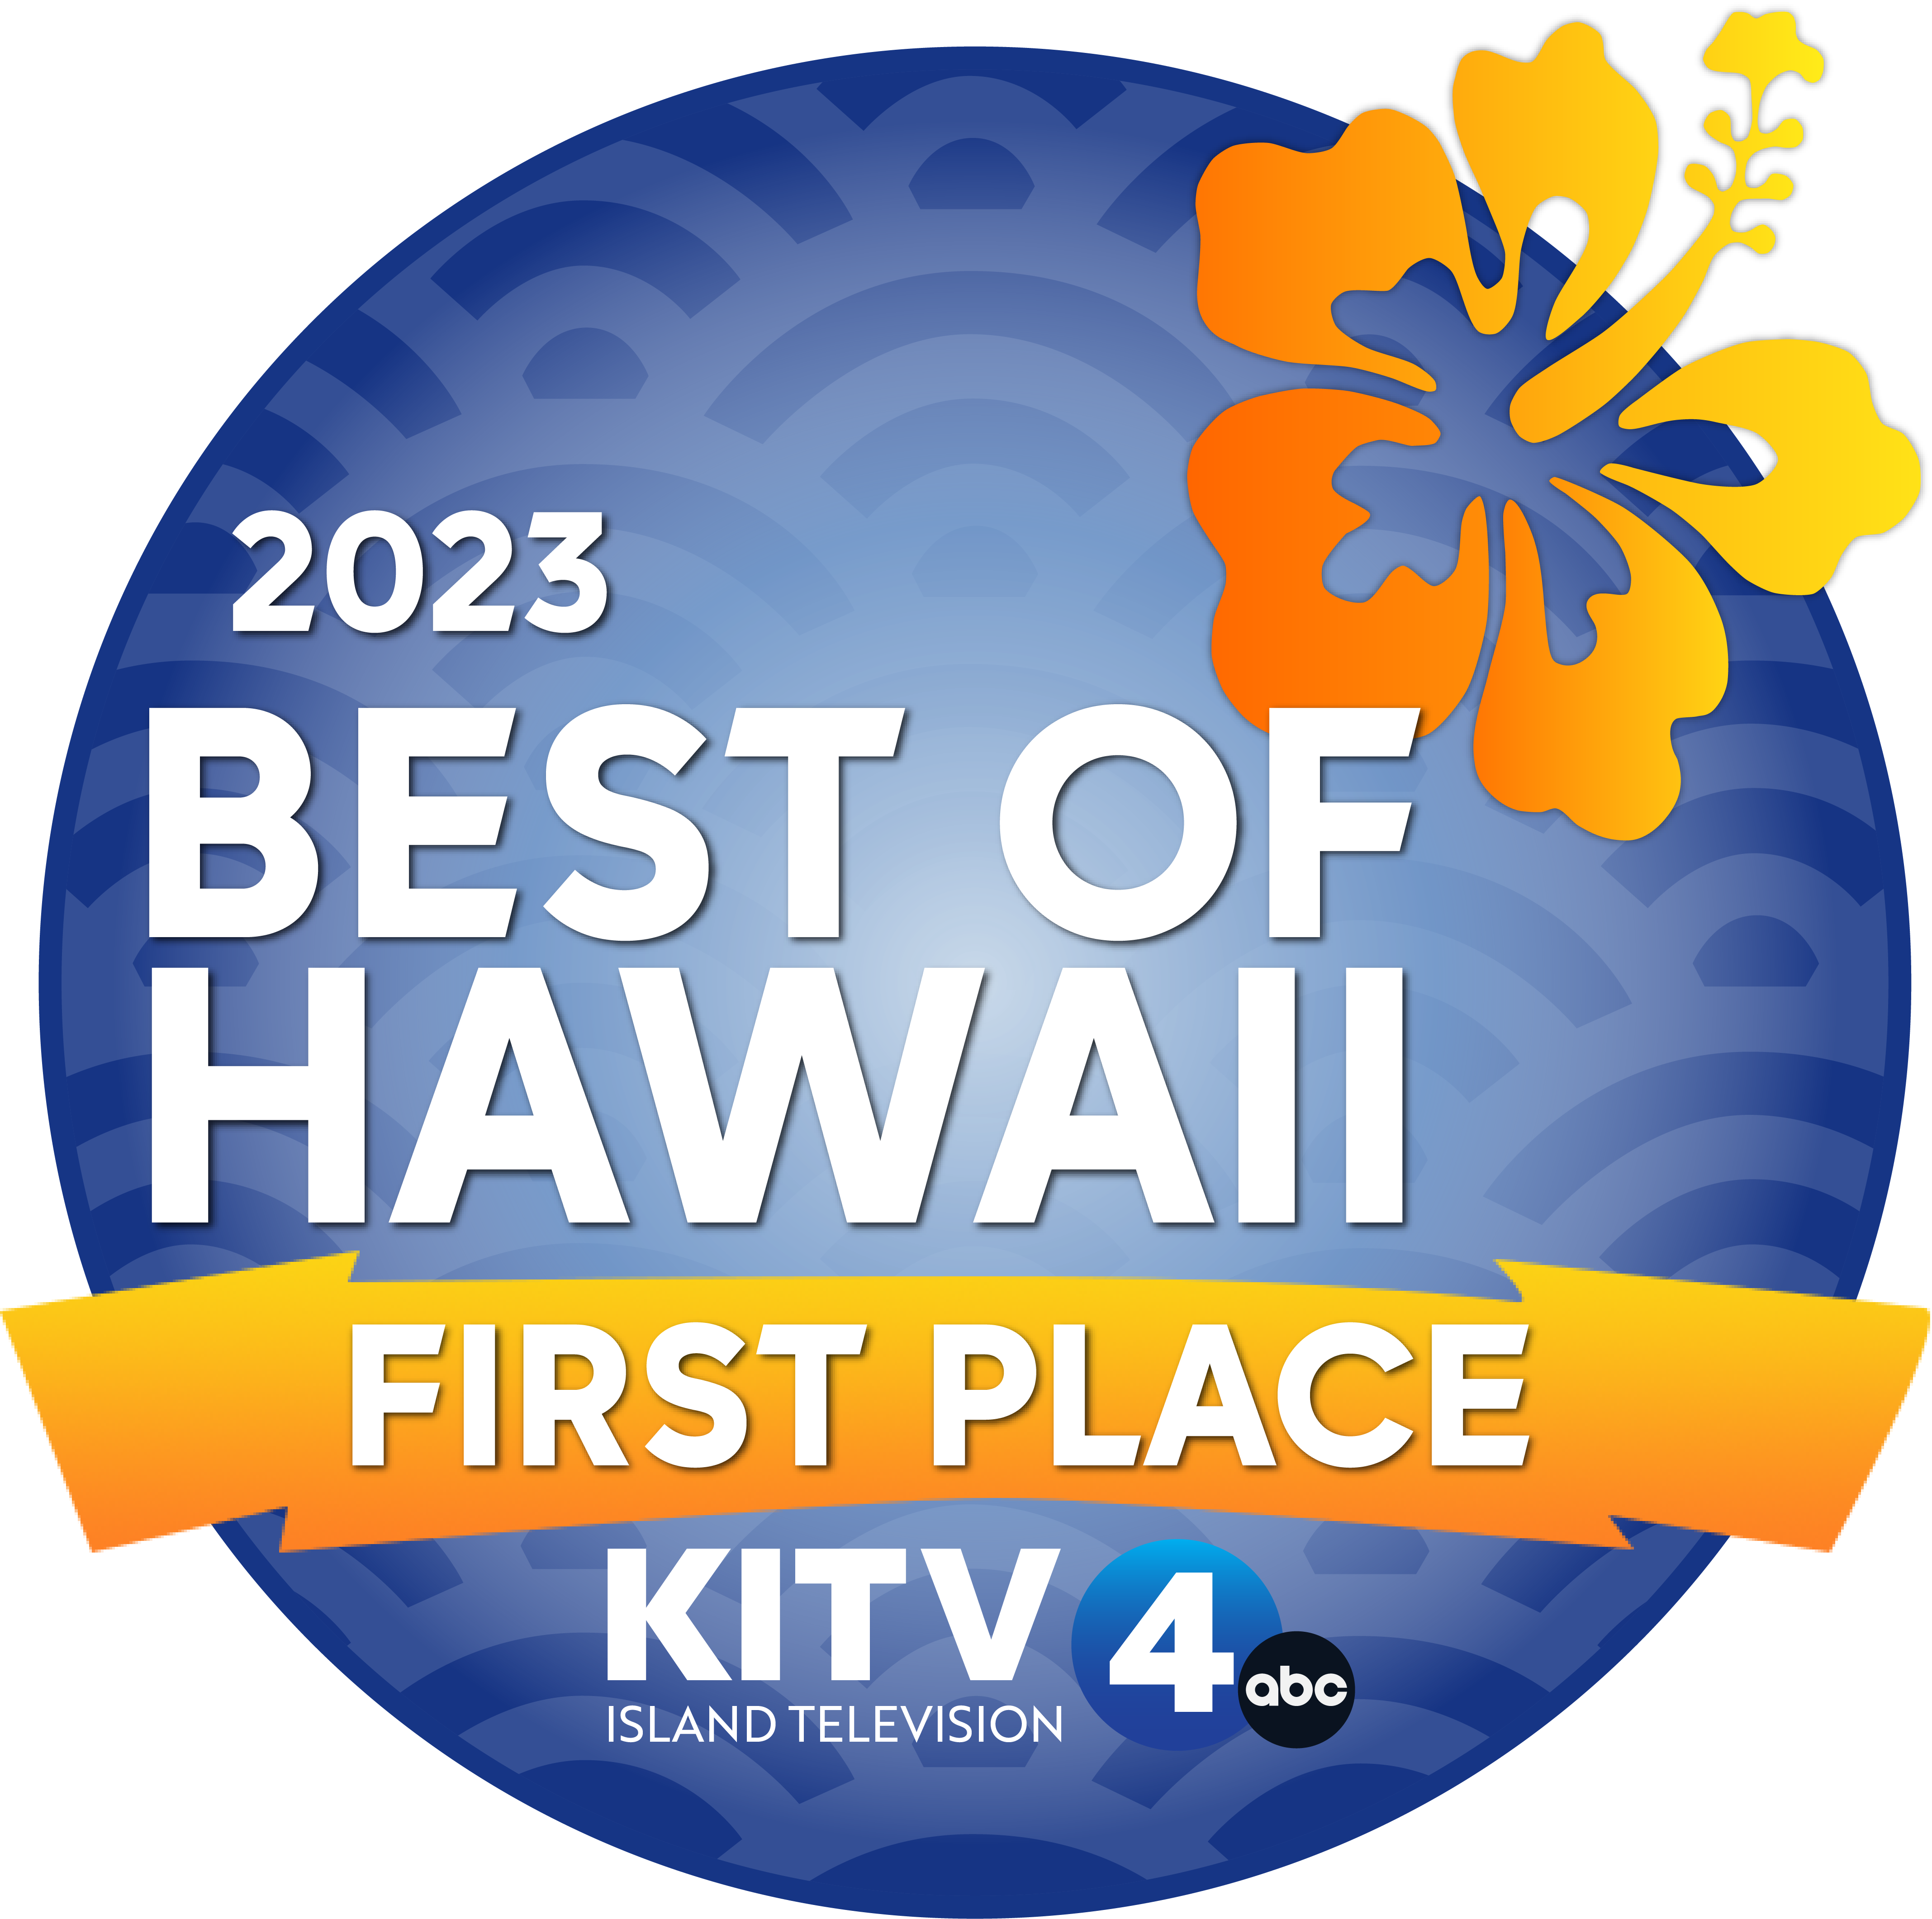 2023 Best of Hawaii - First Place, KITV 4